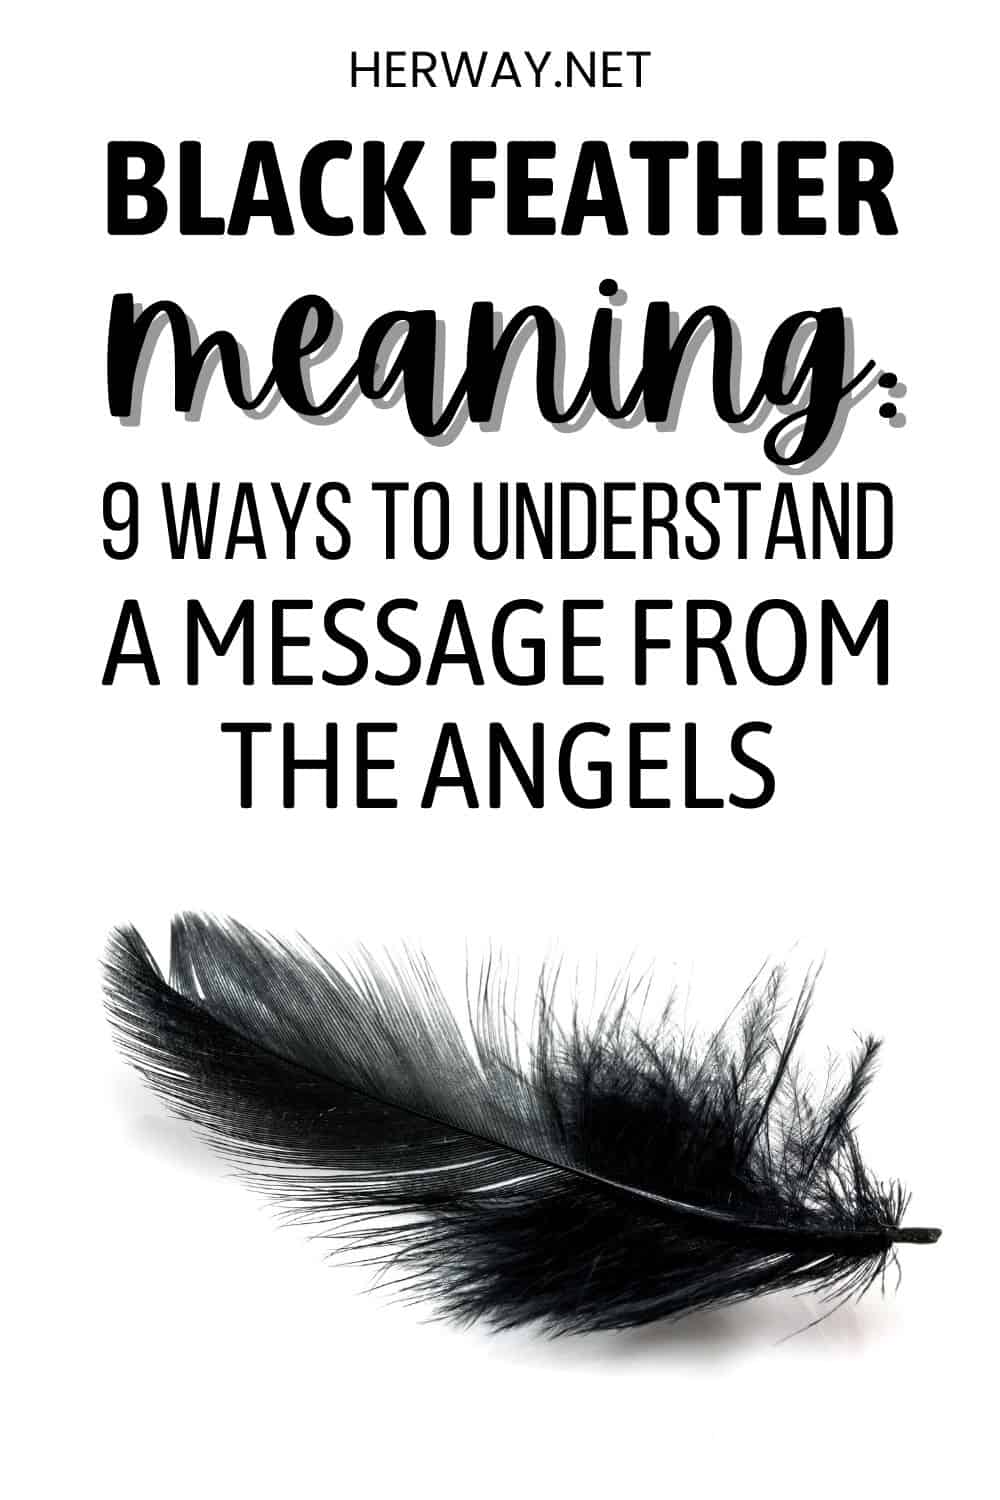 Black Feather Meaning 9 Ways To Understand A Message From The Angels Pinterest